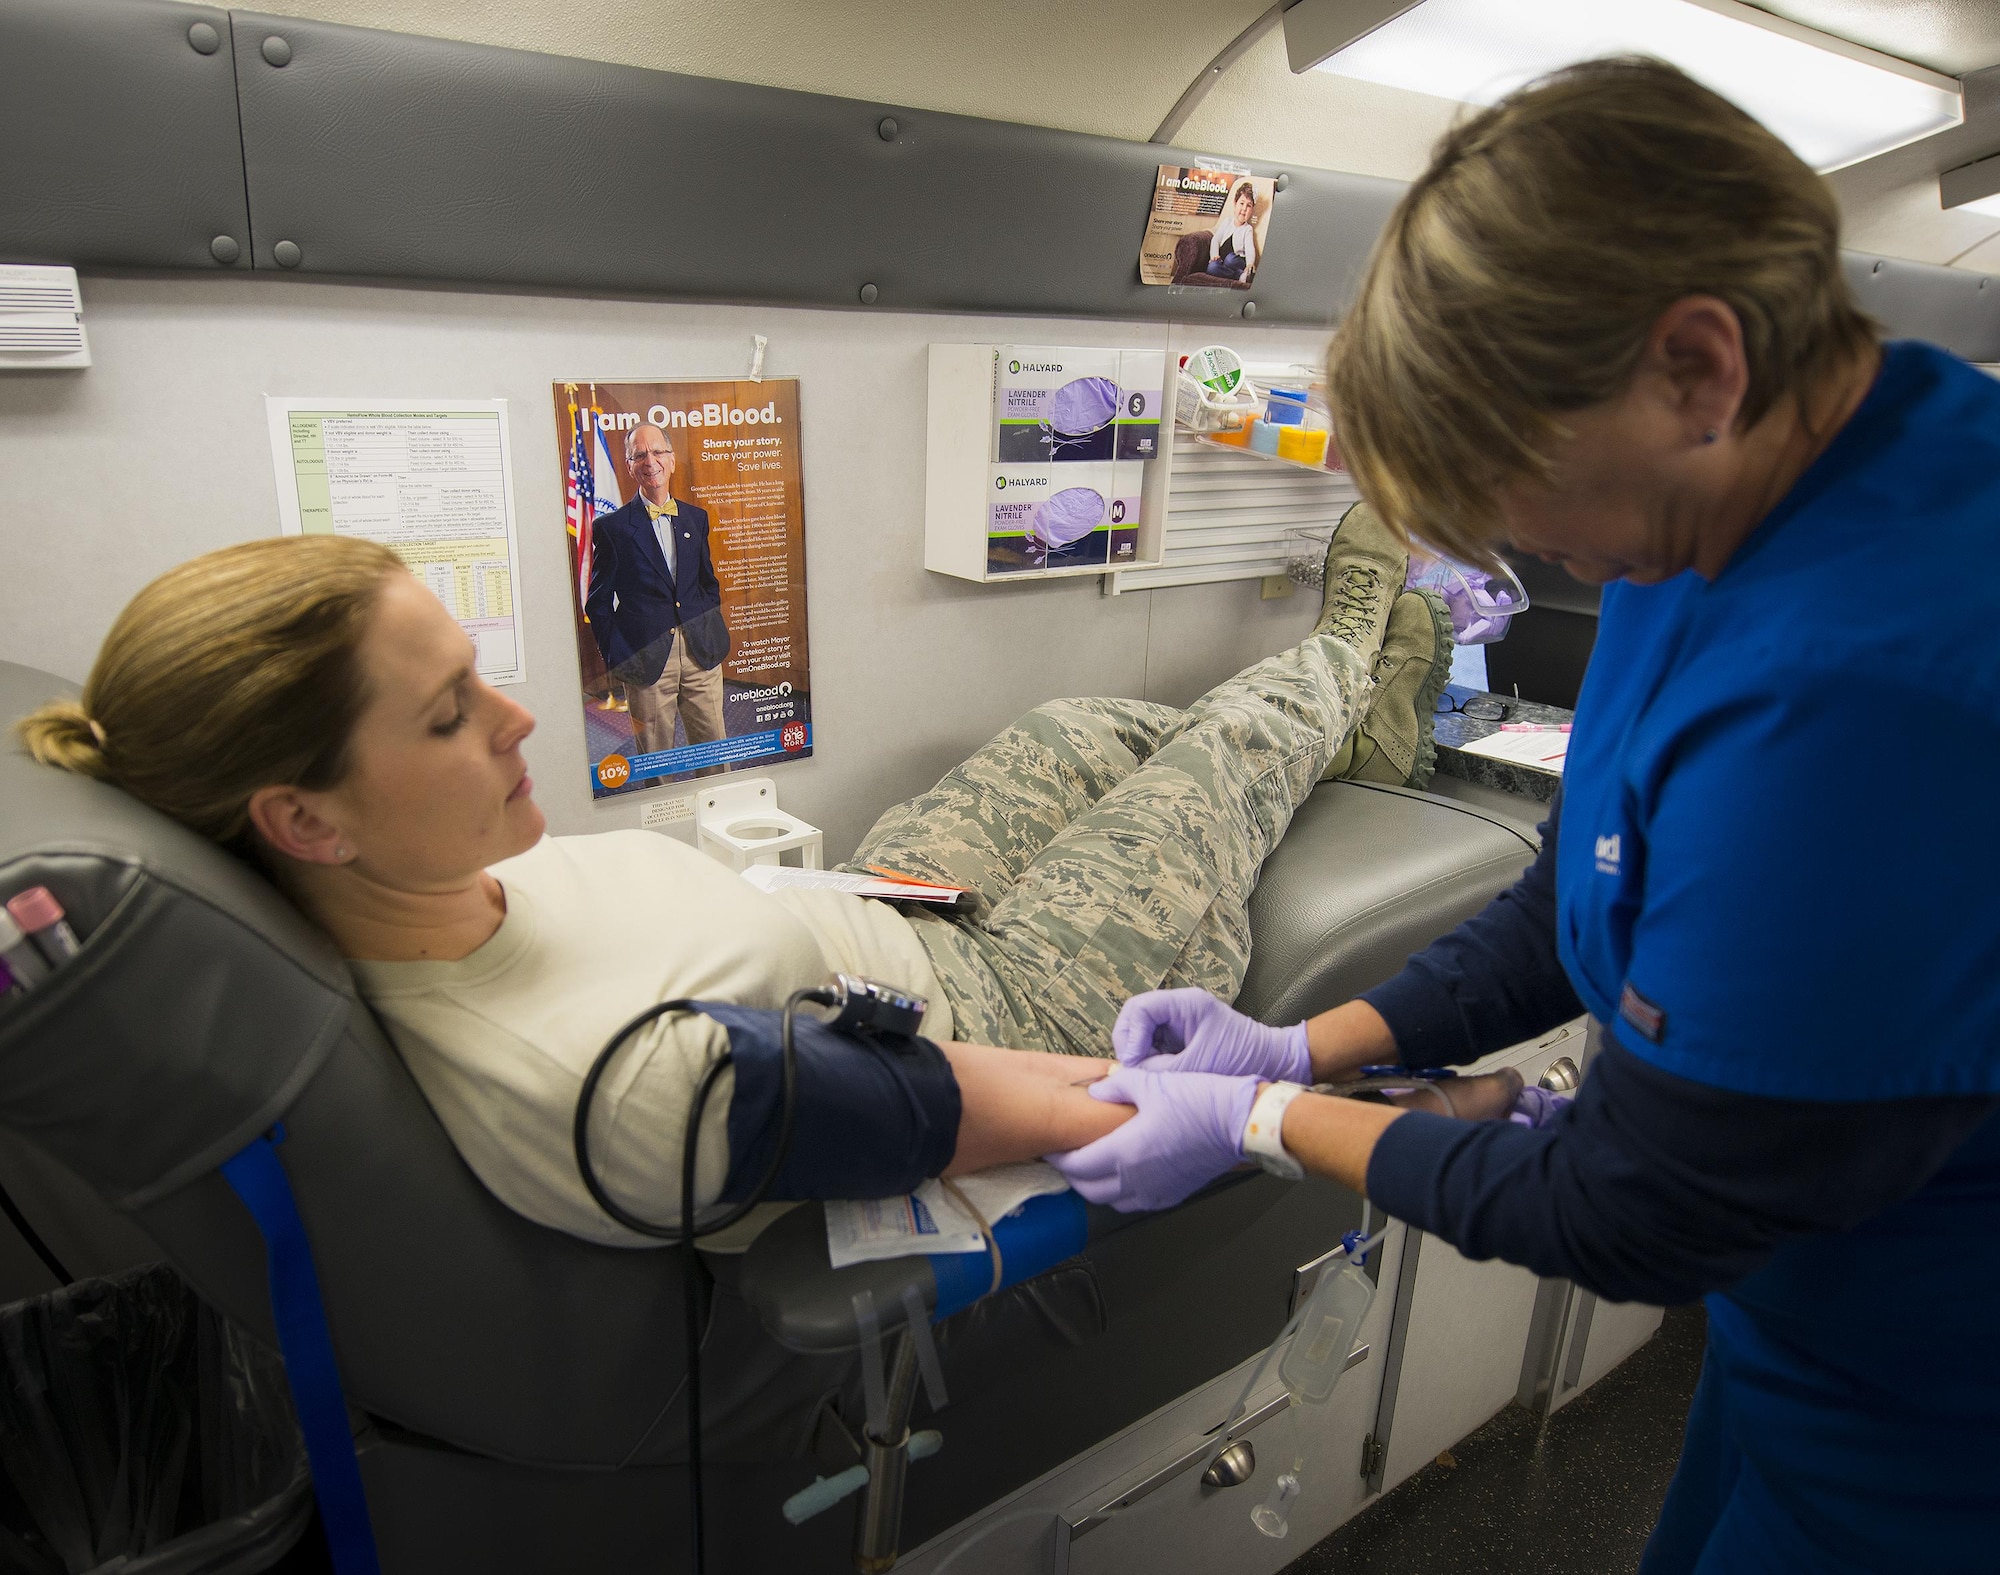 Master Sgt. Christina Anger, 919th Special Operations Maintenance Group, gets the needle to begin donating blood Jan. 8 at Duke Field, Fla.  The Human Resource Development Council-sponsored blood drive was the group’s first event of the new year.  (U.S. Air Force photo/Tech. Sgt. Sam King)